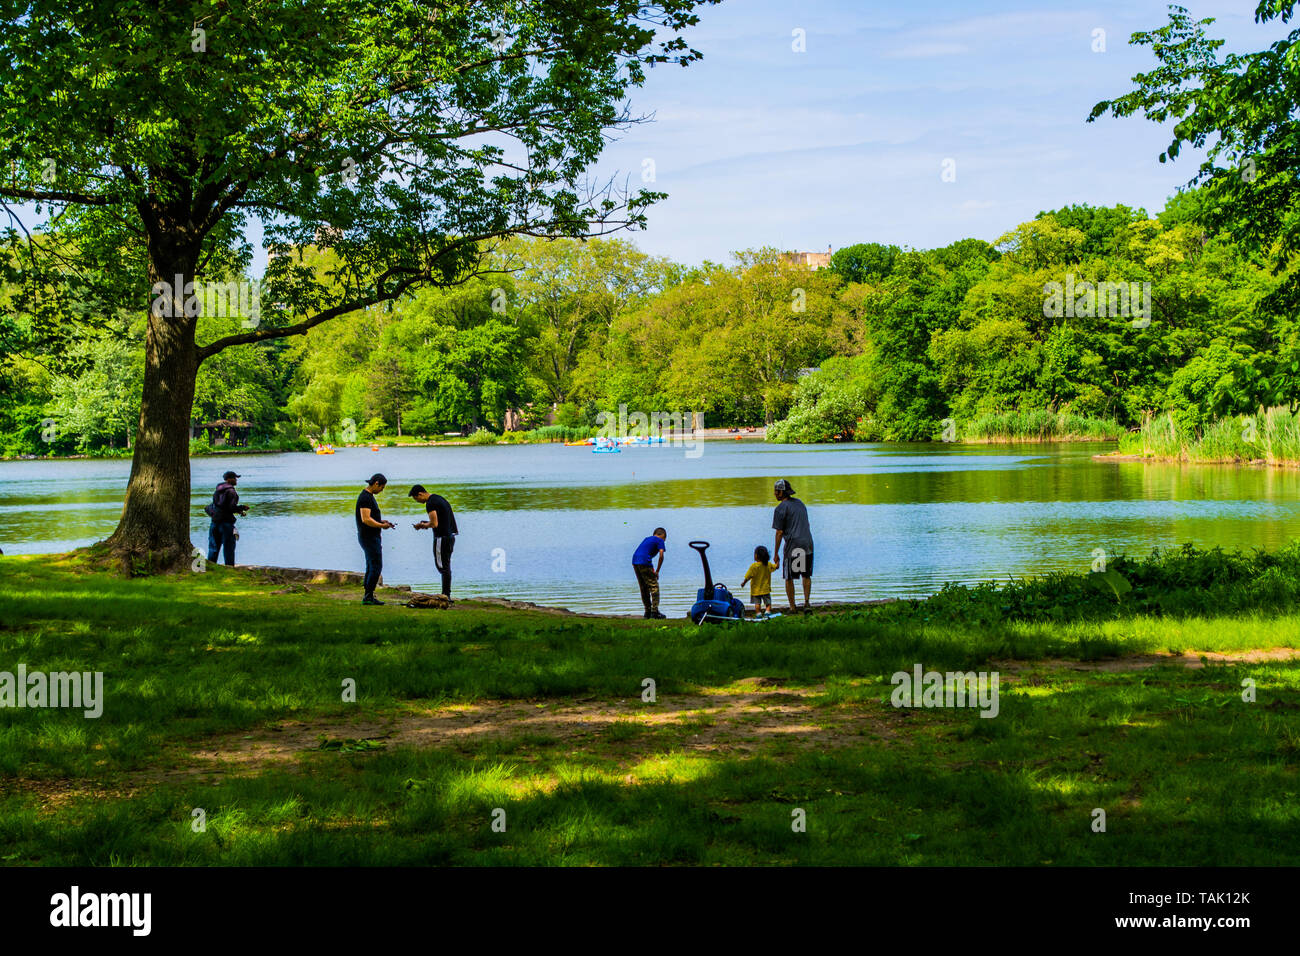 People are standing near the lake in the park Stock Photo